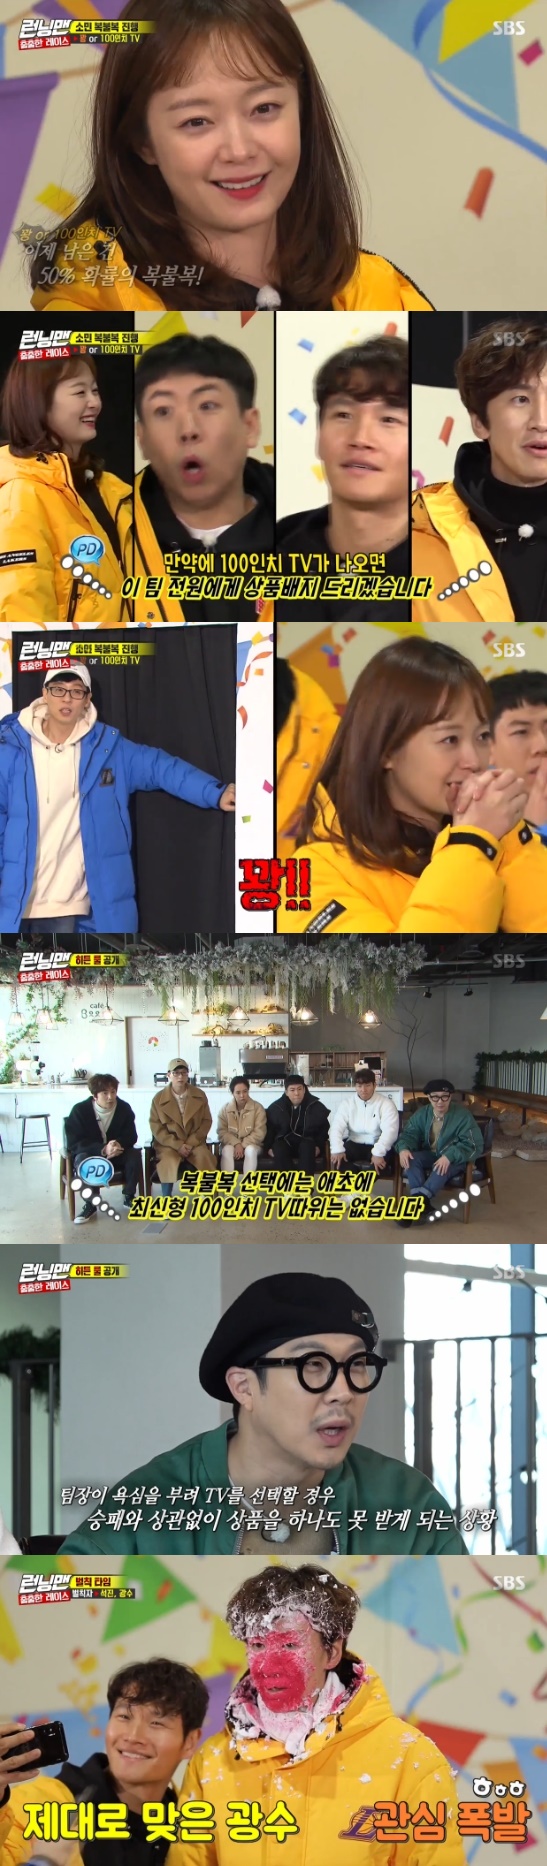 Running Man Jeon So-min won, but he did not win the product because of greed.On the 9th SBS Good Sunday - Running Man, Jeon So-min and Ji Suk-jin became team leaders and played a confrontation.On this day, the members released meaningful Gift and the items they wanted to discard; Race, which started with the commemoration of Ji Suk-jins birth, and the publication of Jeon So-min.Yoo Jae-Suks meaningful Gift was a set of miscarriage goods, and Gift, who wanted to throw away, was Jihos Halloween basket; Kim Jong-kooks abandoning item was Ronaldos climbing pole.Its not all stuff, its a meaningful Gift, so I packed my lunchbox, said Jeon So-min.As soon as the words of Jeon So-min were over, Yoo Jae-Suk said, Is not this a gift from Sechan? And the members laughed, saying, It is not mine.Lee Kwang-soo reported, I took a picture of Sechan in the morning and sent it.The throwaway was a Kim Jong-kook T-shirt, who was embarrassed to say throw it on me when a T-shirt with his face came out.Jeon So-min said, When I put this on at home alone, I felt like I was just too alone.I was so scared, she said, laughing.Ji Suk-jin said, I loved being able to Gift for my members so I went to the department store with my wife. I remembered the photon the moment I saw this.It was a hip pad. The discarding item was a navigation for United States of America, Canada.Yoo Jae-Suk said good without a soul, and Ji Suk-jin laughed, saying, Its better than your Halloween rip.The meaningful Gift of Lee Kwang-soo is a large-capacity mixer and blade set; Kim Jong-kook said, This capacity mixer costs one million won, and the members were agitated.Yoo Jae-Suk said, Lets change the stone-shaped navigation first.The throwaway item is the 300 Ugboots of the size bought during the United States of America trip with Kim Jong-kook.Lee Kwang-soo said, And nine years ago, Haha gave me a gift. I went into the outdoor unit warehouse nine years ago and it was the first time today.Here, Yoo Jae-Suk finished the Halloween package with a Halloween rip.As a result of the scissors rockbowl by Jeon So-min and Ji Suk-jin, the So-min team (Jeon So-min, Kim Jong-kook, Lee Kwang-soo, Yang Se-chan), and the Seokjin team (Ji Suk-jin, Yoo Jae-Suk, Song Ji-hyo, Haha) were formed.We decided to do it all today as Friend, said Jeon So-min, who created the Jeon So-min rule.Kim Jong-kook then pressured him to say, Its originally a friend fighting and growing.Then well call it by name, except for the last name, like AOA, Yoo Jae-Suk said.The first mission is, Whats the name of the food? The team that found the menu name for longer food won, and the food should be eaten for only one person.The team of Seokjin who heard the mission was satisfied that weak people gathered well together.The team found a 22-letter menu. Somins team had 27 letters. Haha found a 45-letter menu, but the menu was quick and laughed.The second mission was Topgol CF. If the ambassador was played by the empty part, the team won. The members followed the CFs of Jeon Ji-hyun & Jo In-sung, Kim Jae-won & Jang Na-ra.Jeon So-min, who won two wins first, had to choose between the gift of all 100% of the team members and the opportunity to win 100-inch TV worth 8 million won.Jeon So-min chose TV without a worry, but it was a slam: Jeon So-min pulled the members want-to-throw items, and Ji Suk-jins navigation came out.Thats when the production team revealed the Hidden Rule; earlier, the production team met with members except for Jeon So-min and Ji Suk-jin, saying, There is no TV in the first place.The more greed the team leader gets, the more he can not take anything.  Finally, Lee Kwang-soo and Ji Suk-jin were punished.Photo = SBS Broadcasting Screen